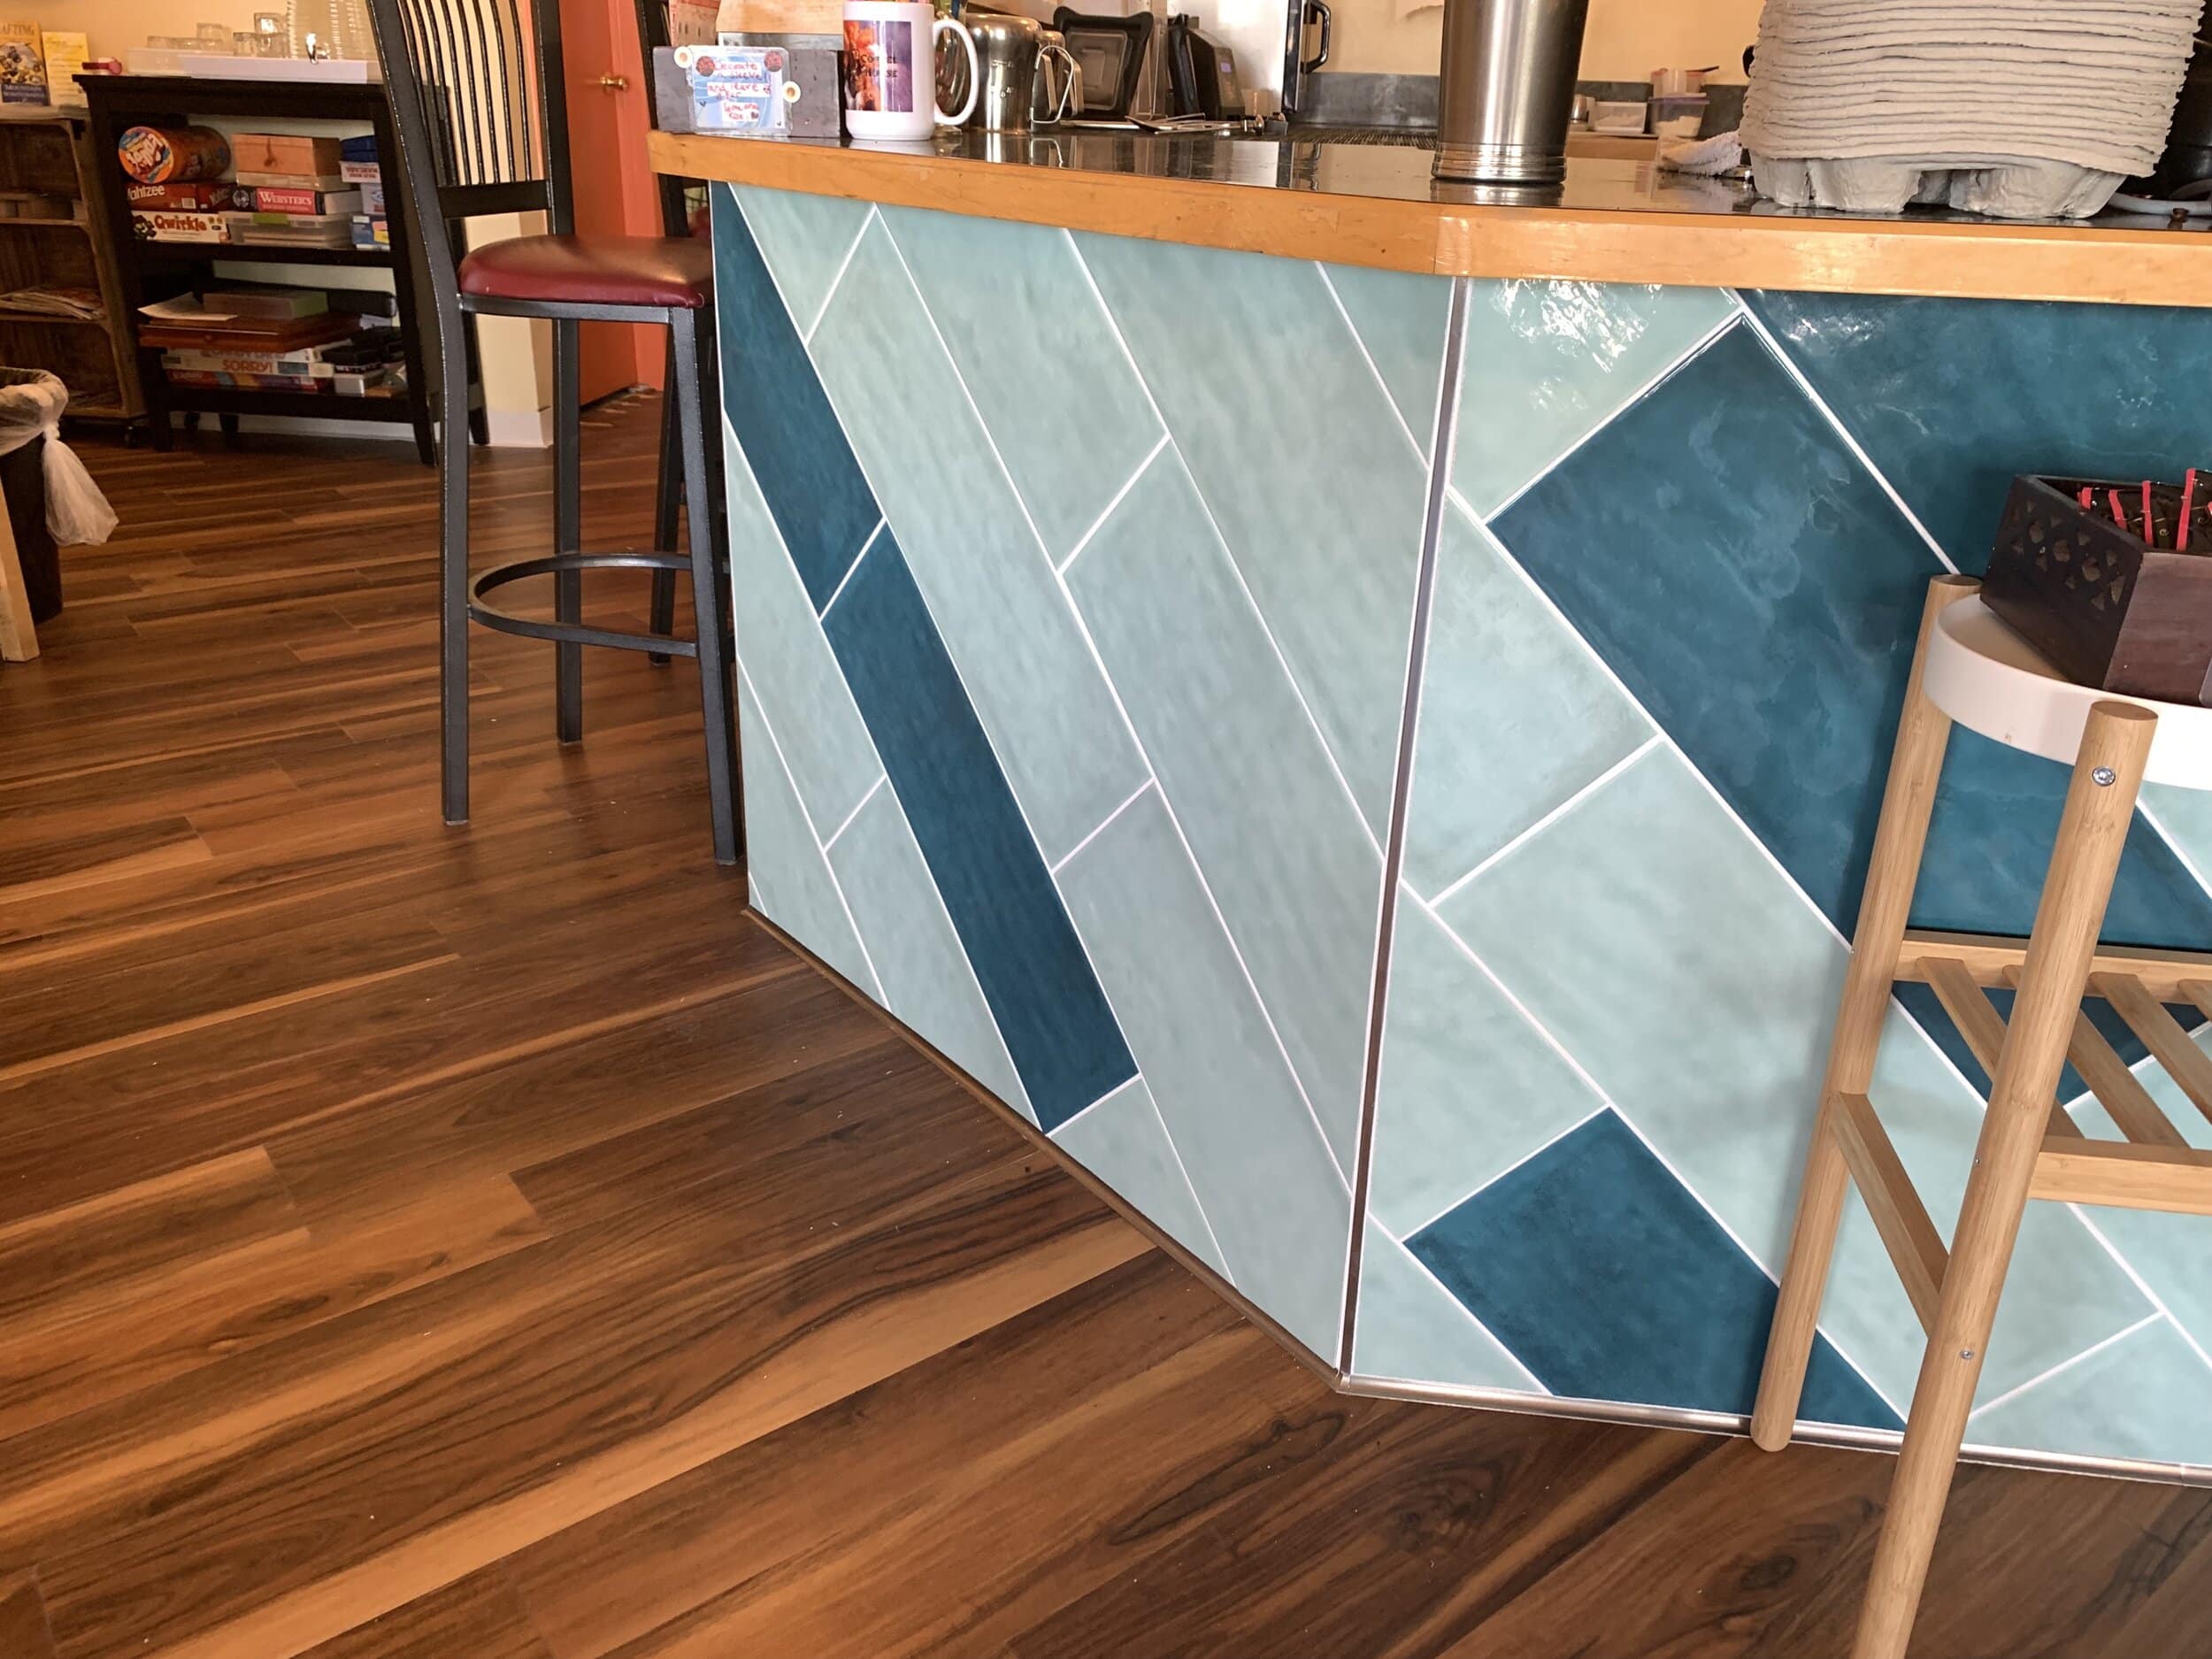 Coffee bar with blue tile and a wood countertop